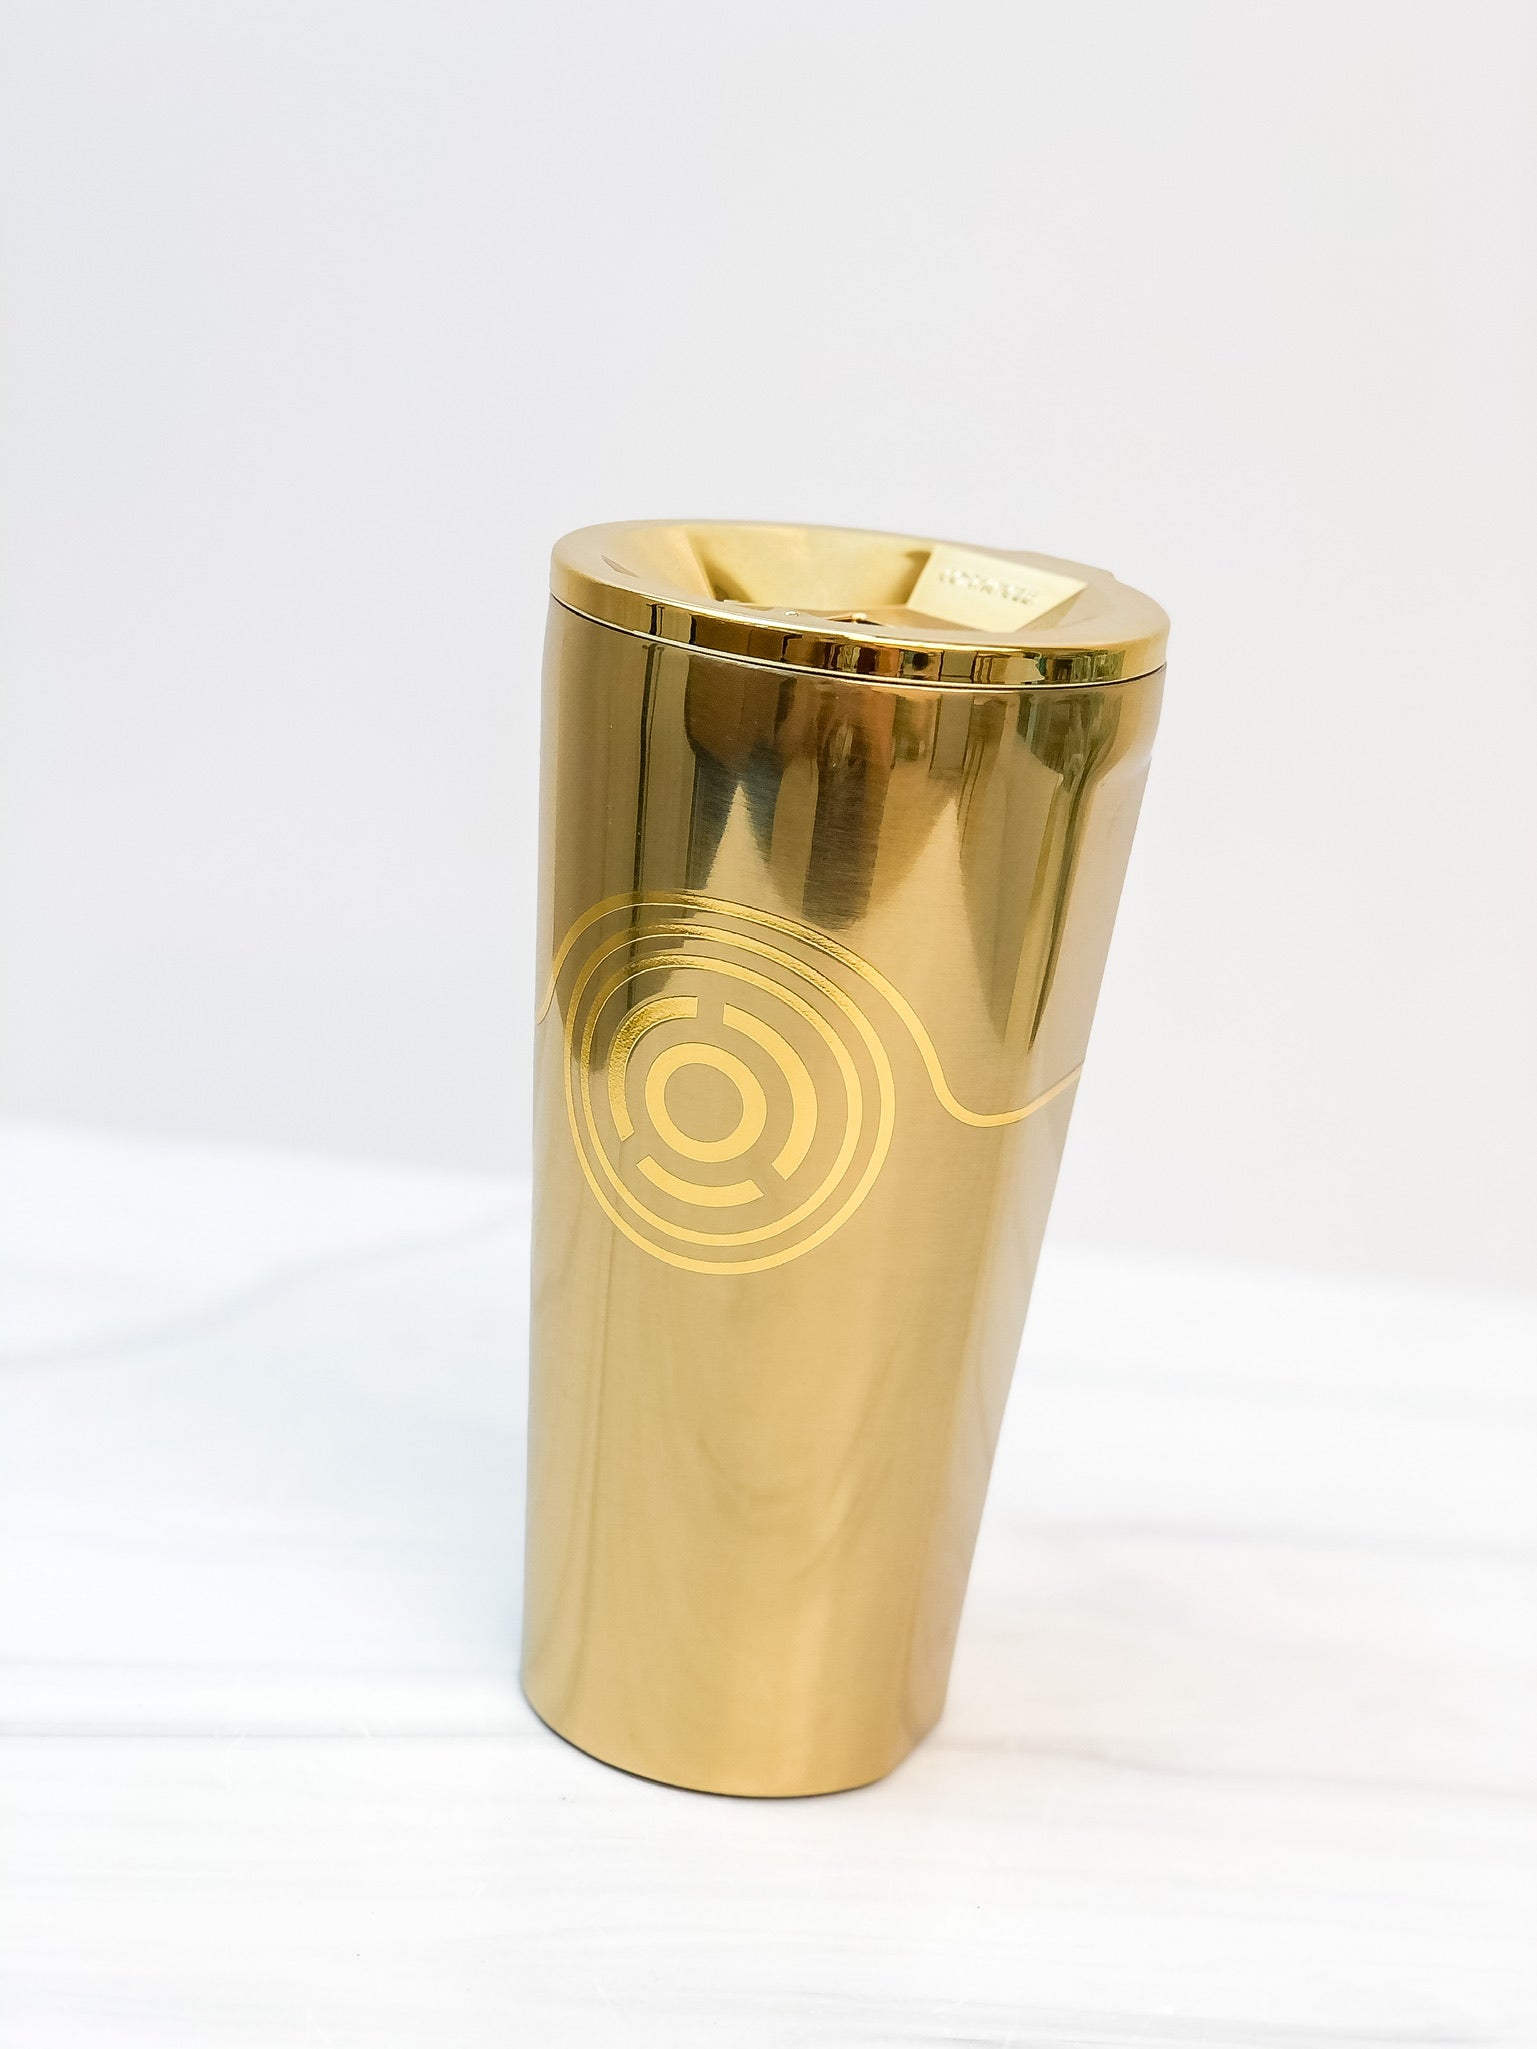 16 oz Stainless Steel Star Wars Tumbler by Corkcicle - C-3PO